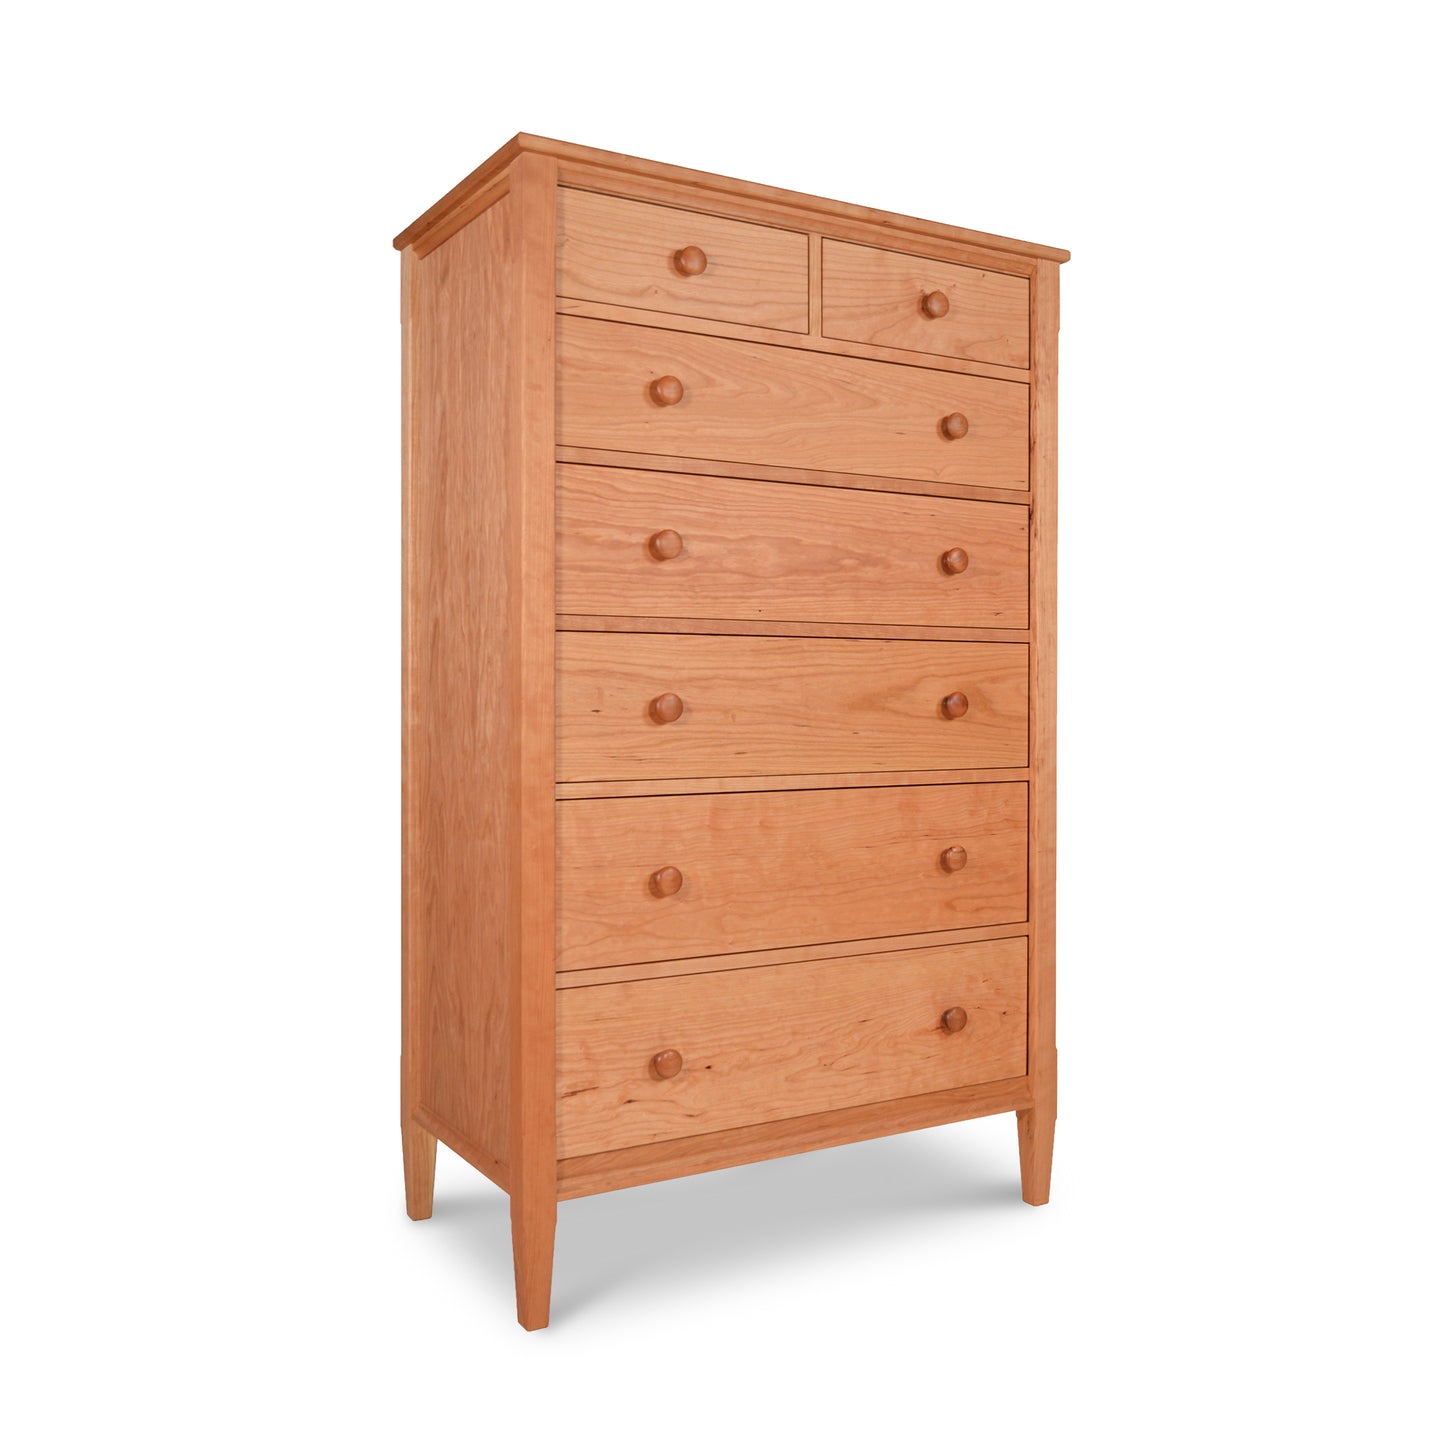 A Maple Corner Woodworks Vermont Shaker 7-Drawer Chest, made by skilled Vermont furniture makers, crafted from natural cherry wood, on a white background.